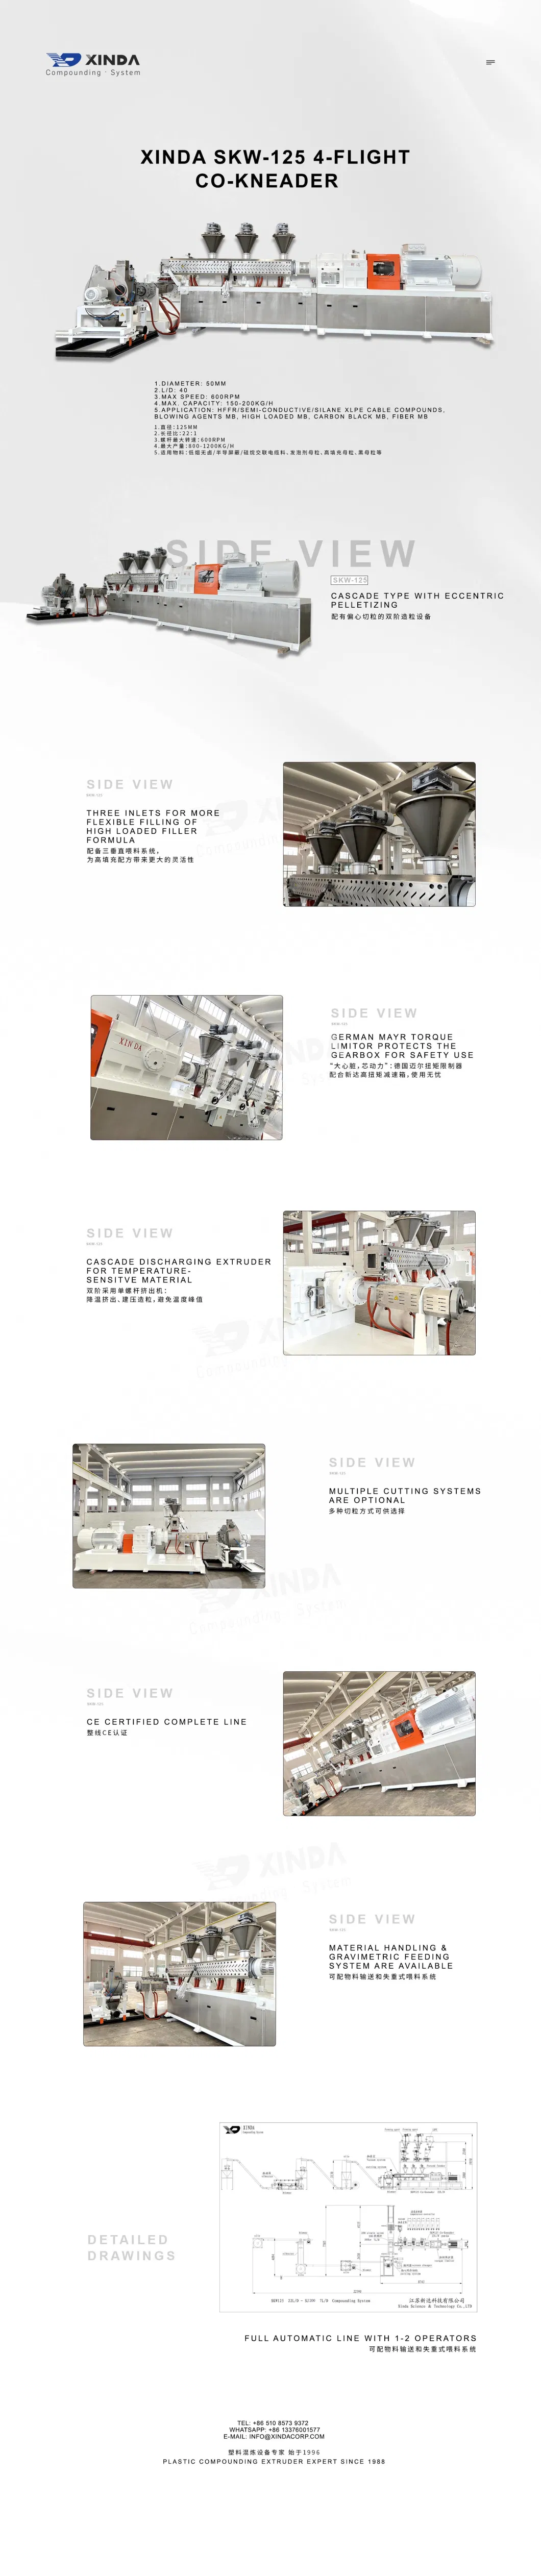 Co-Kneader Plastic PE/PVC/PPR/HDPE/LDPE Extruder/Single Screw/ /Extrusion Machine Compounding Pelletizer Plastic Film Pelletizing Machine PE with CaCO3 Extruder